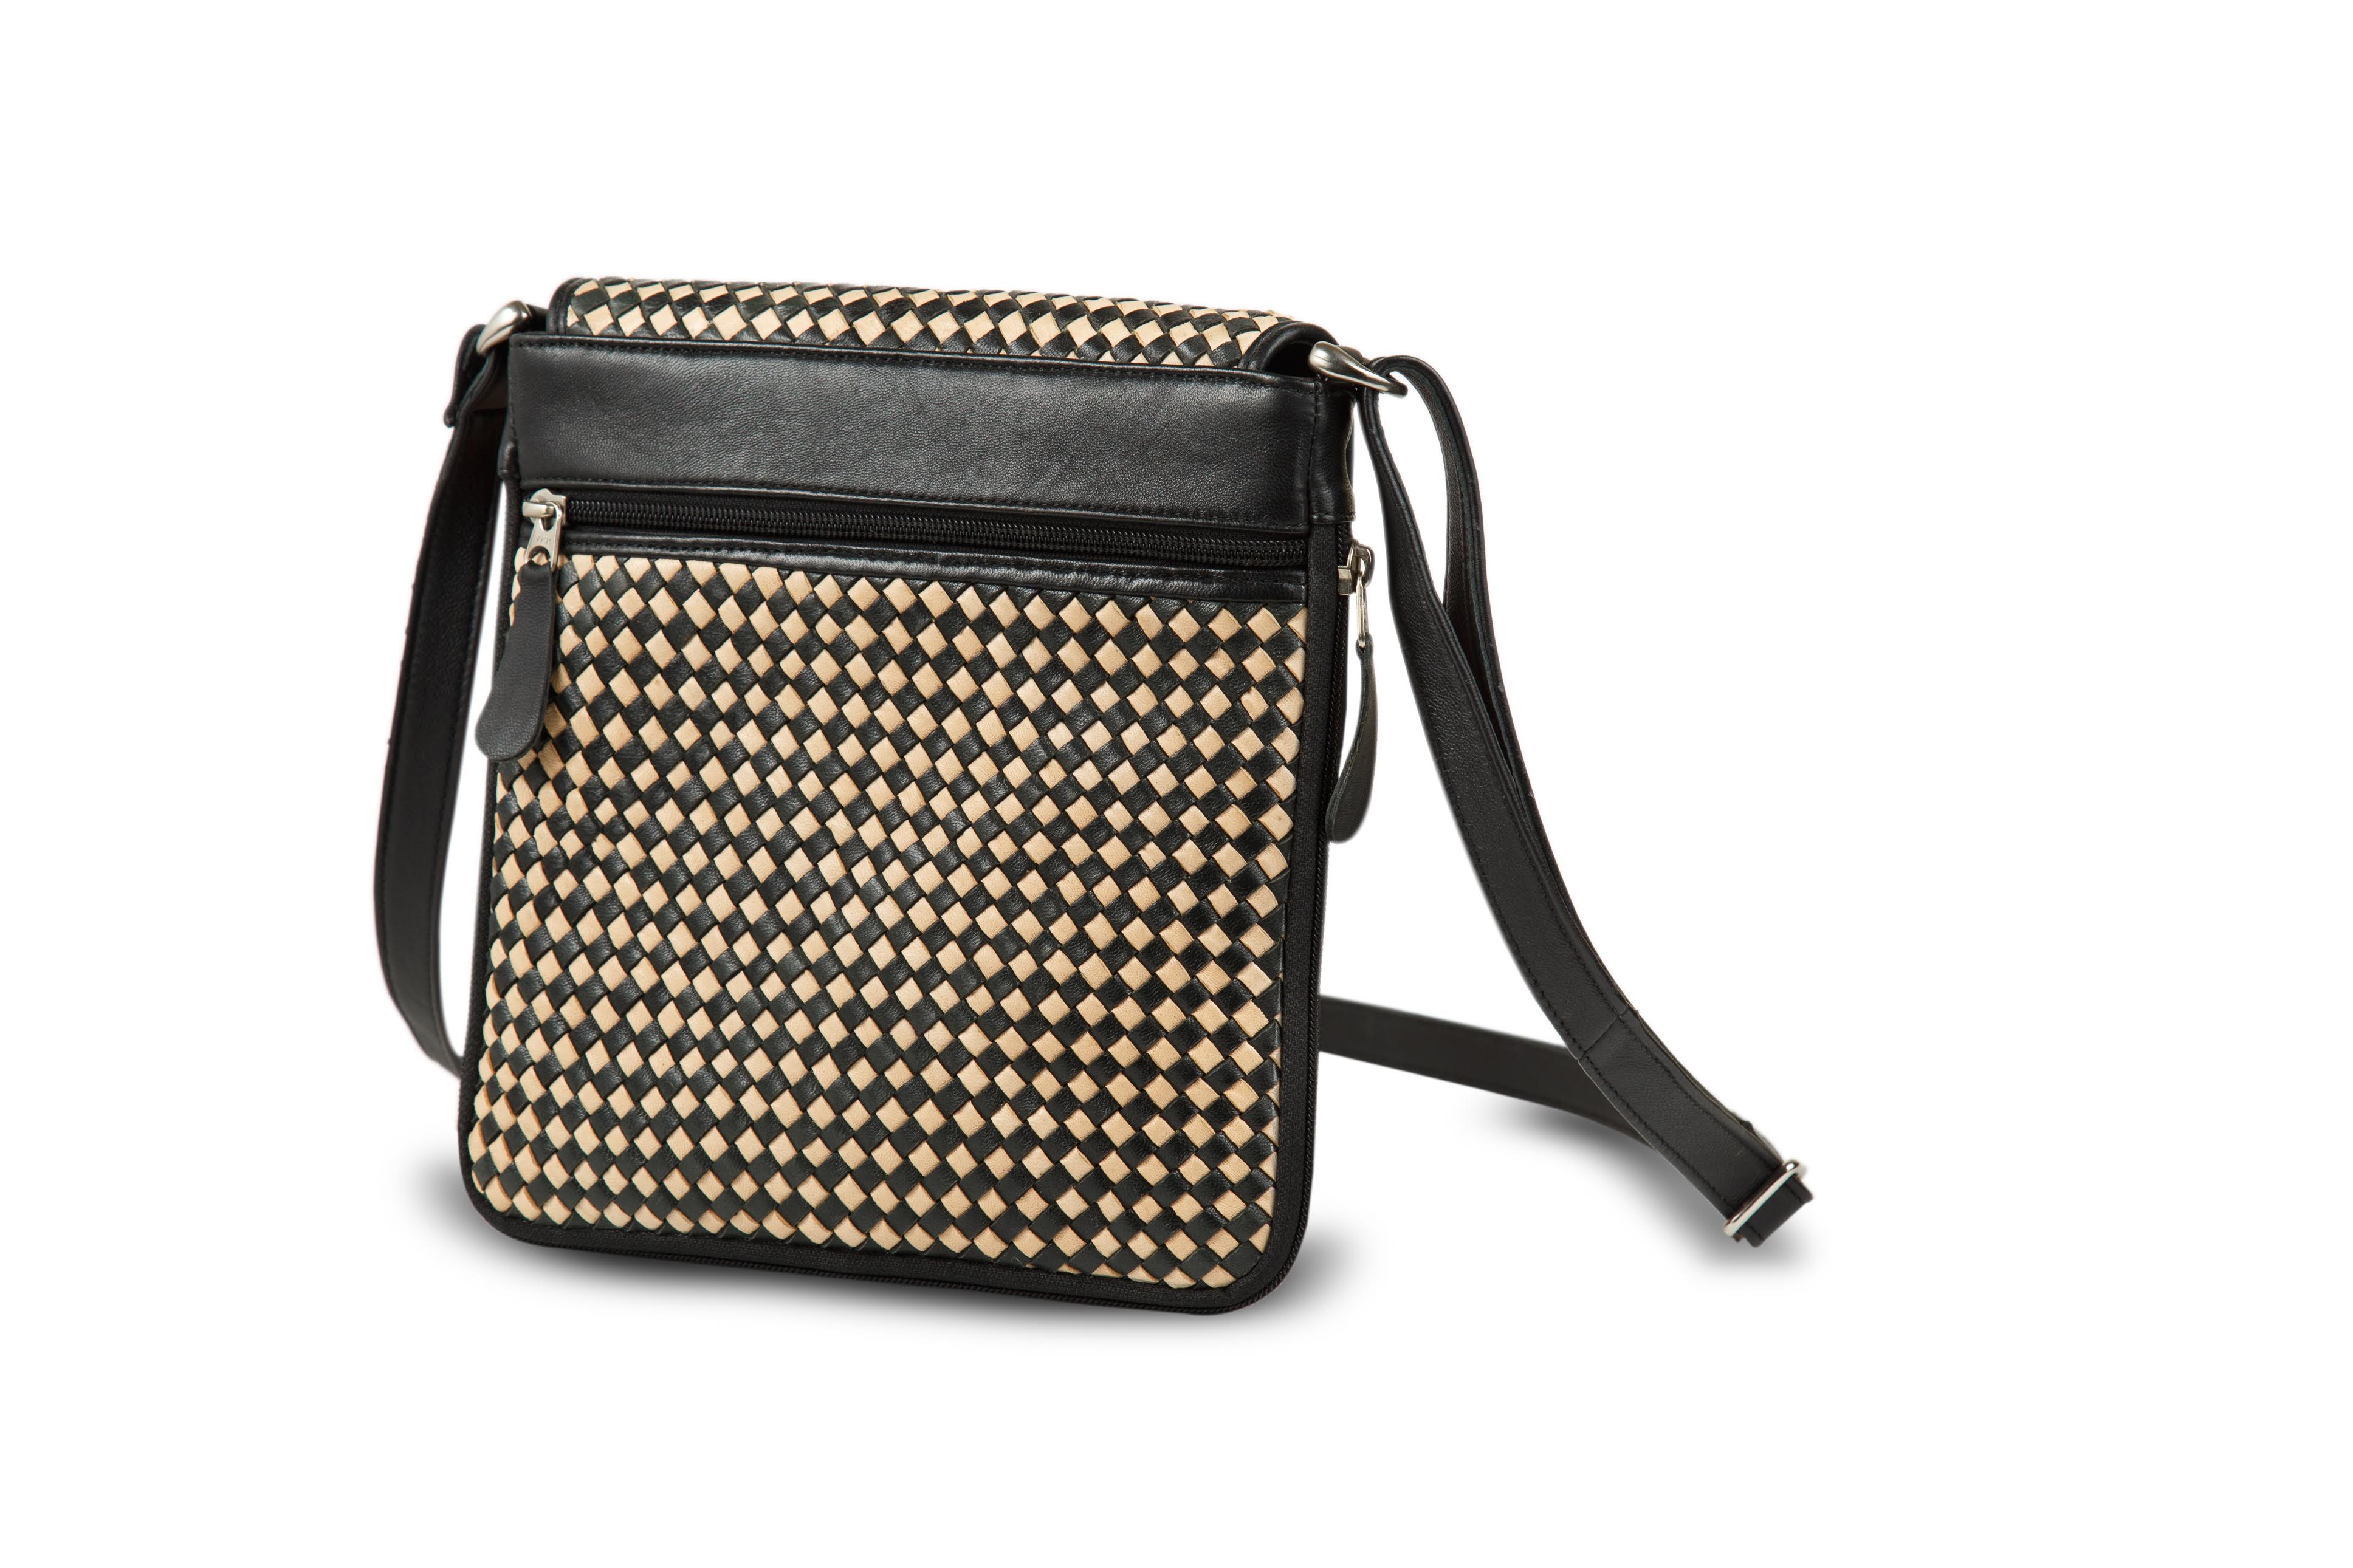 Knitted Leather Cross Body Bag Black and Beige